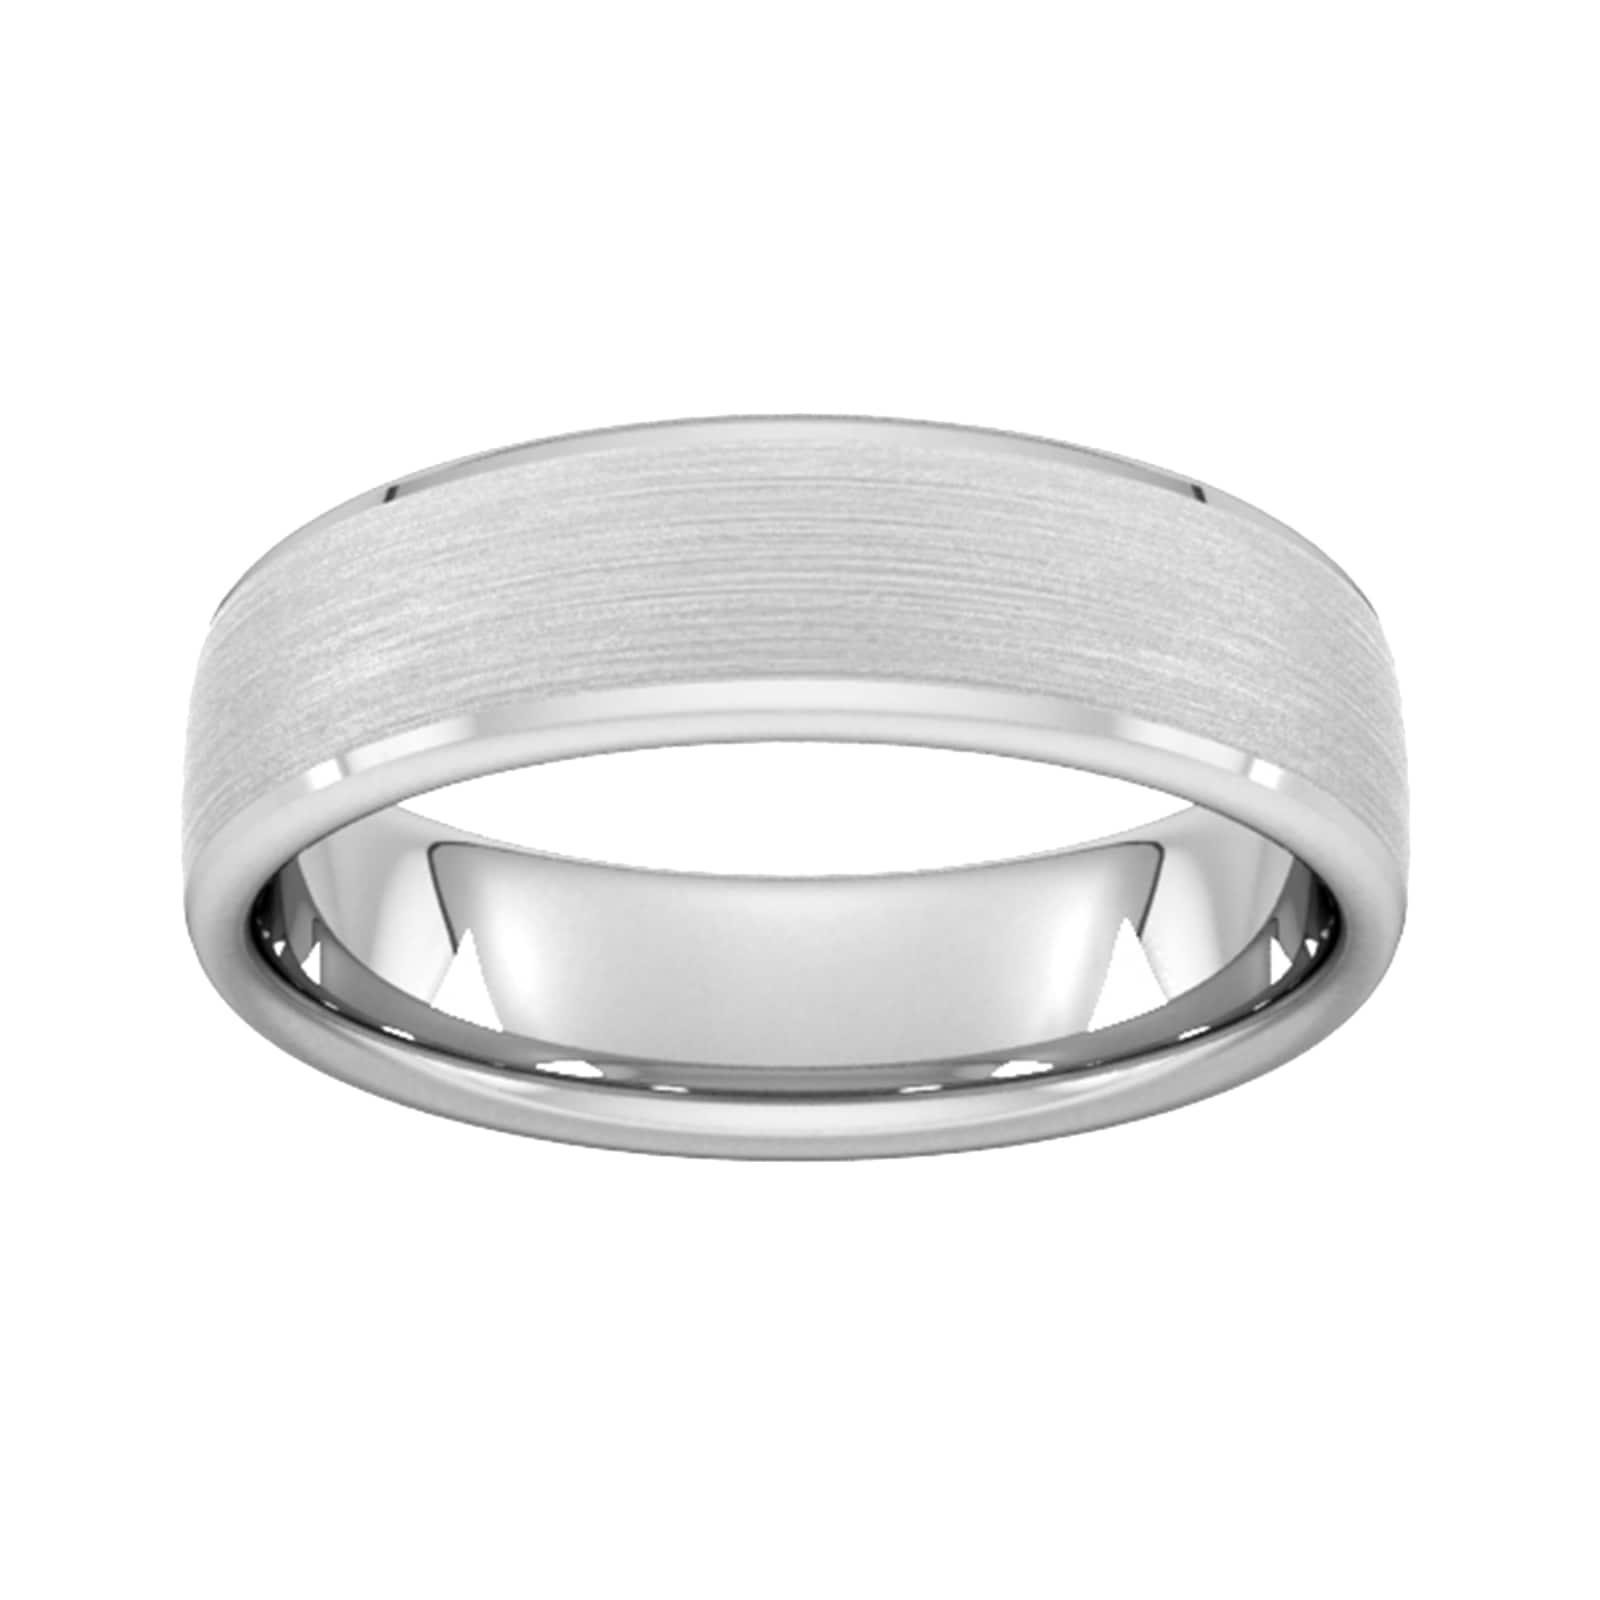 6mm Slight Court Heavy Polished Chamfered Edges With Matt Centre Wedding Ring In 950 Palladium - Ring Size R